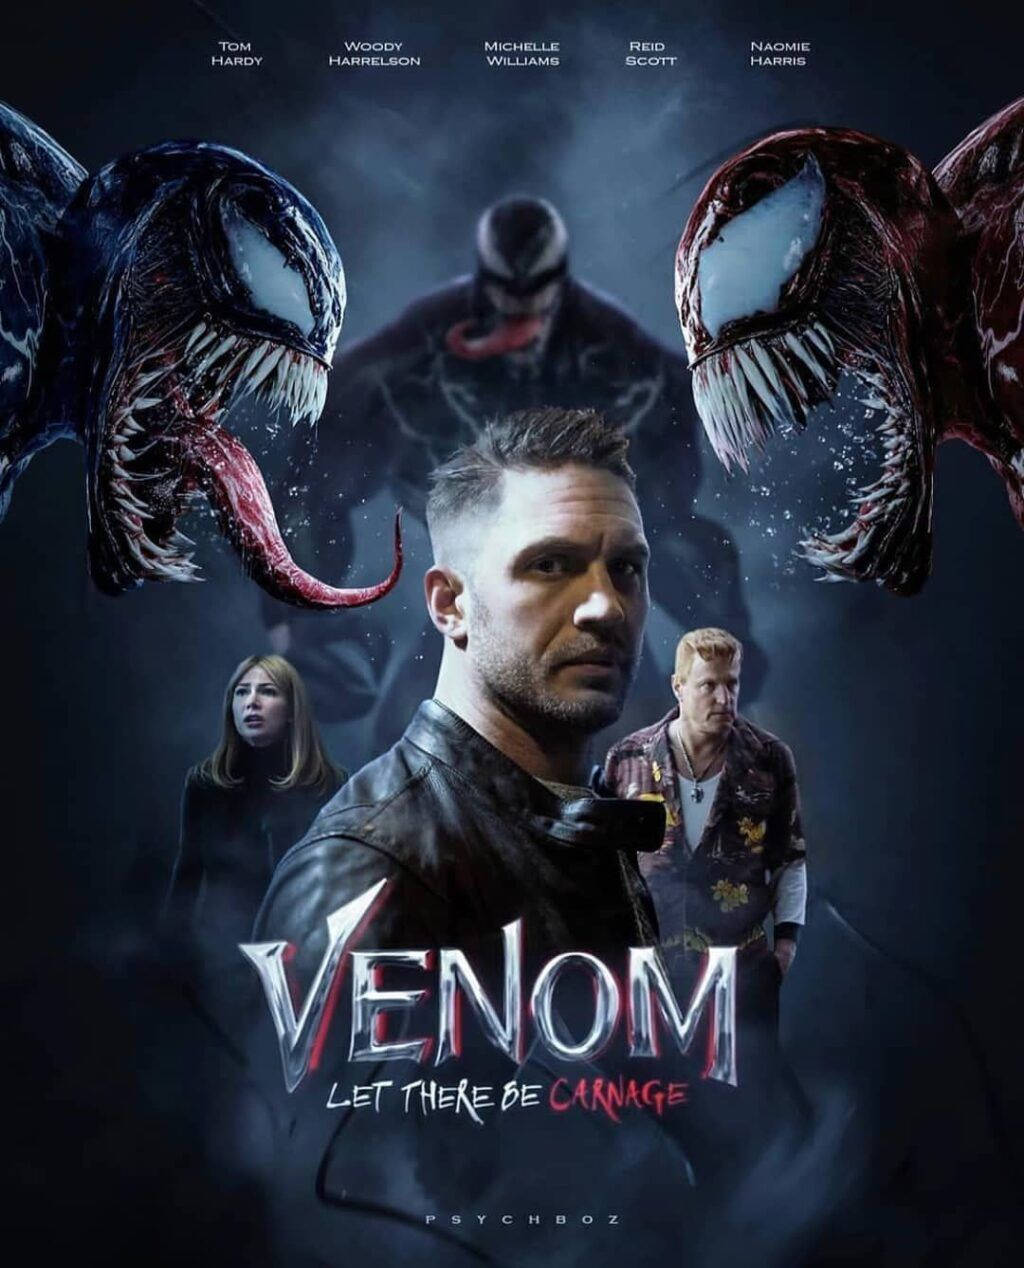 Venom Let There Be Carnage Cast